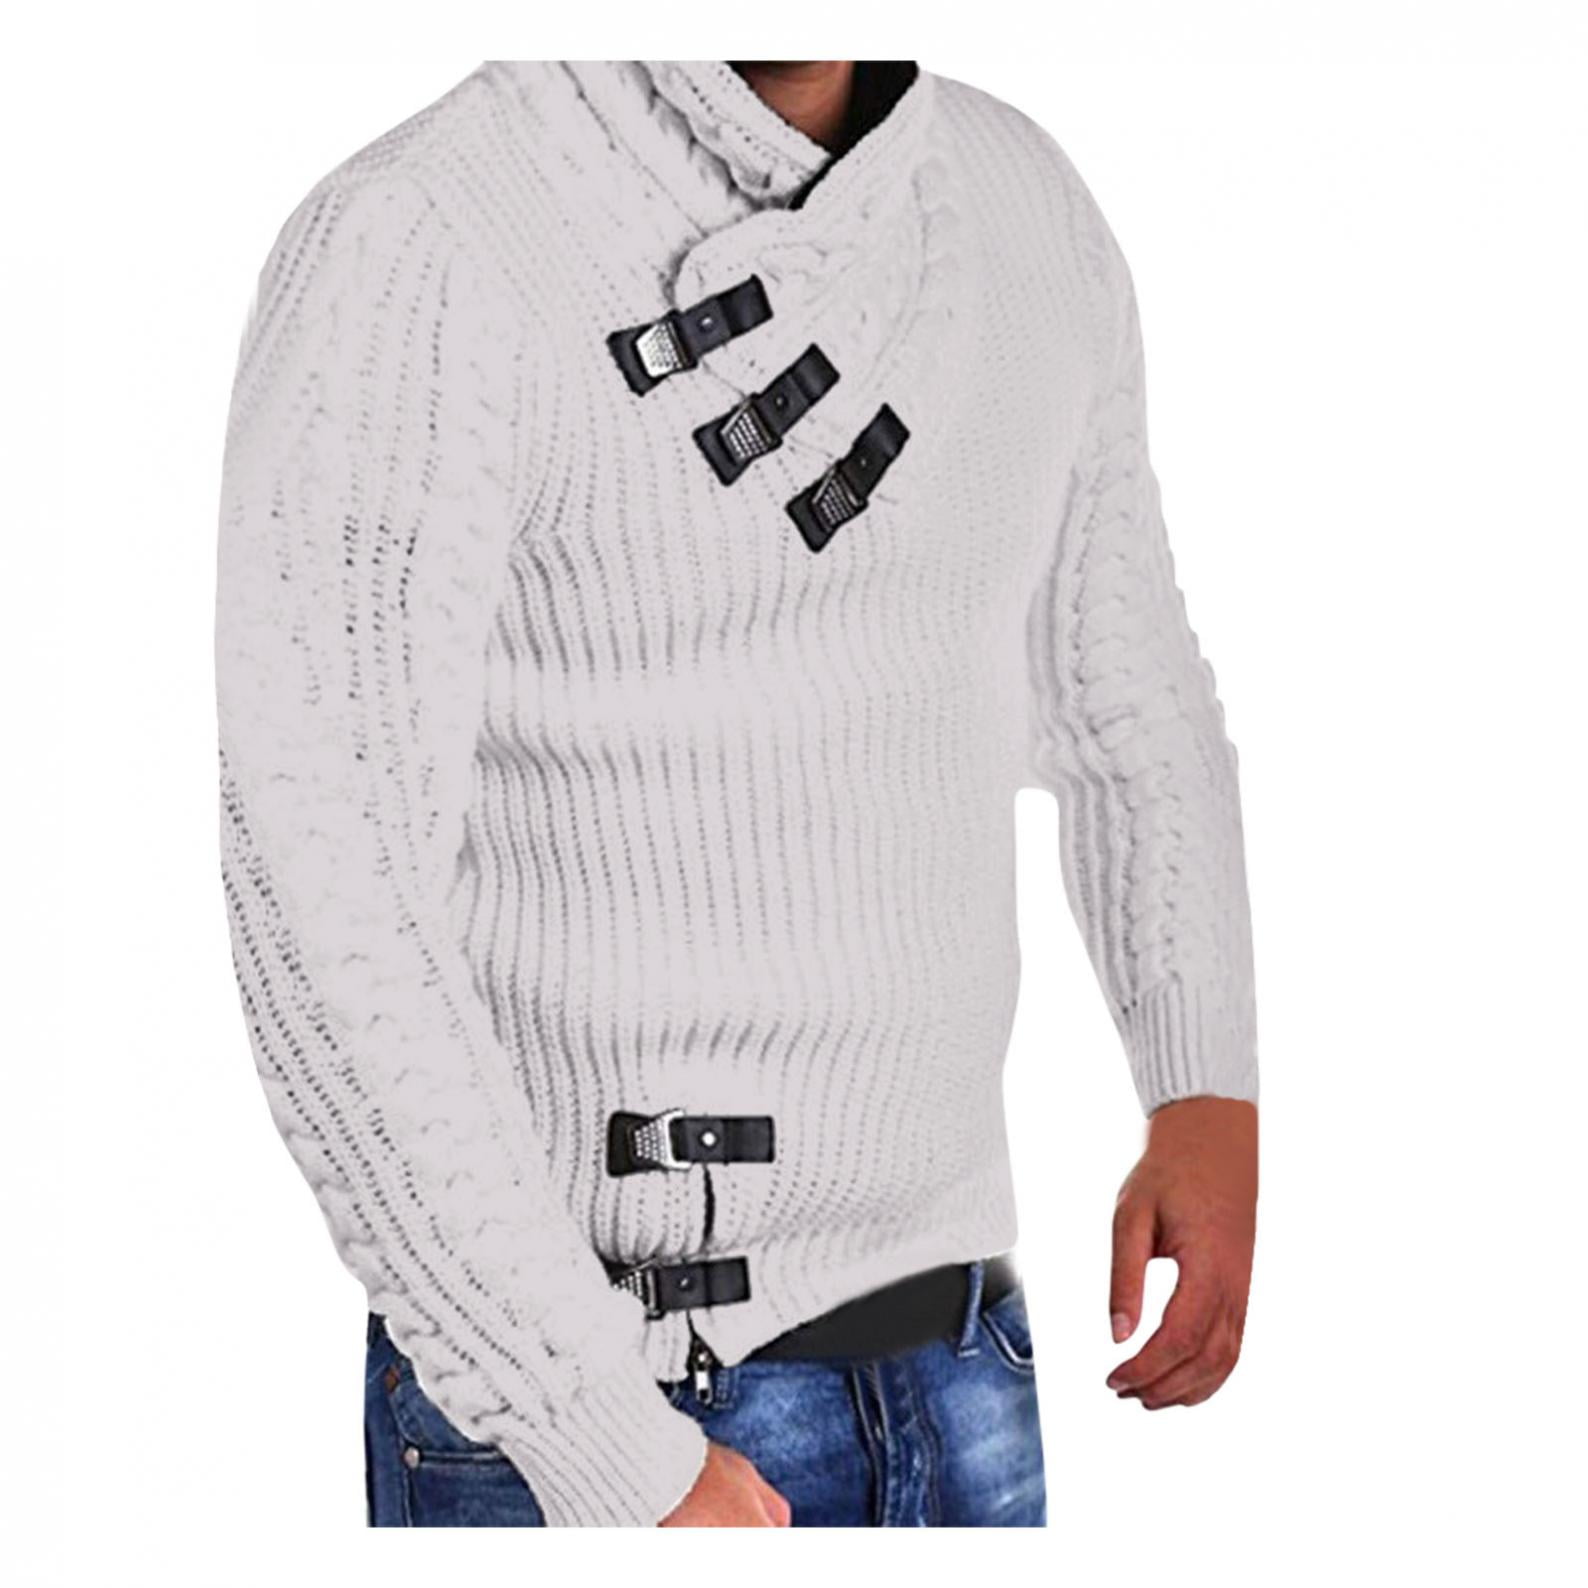 Hurrg Mens Long Sleeve Pullover Knitted Casual Turtleneck Slim Fit Color Block Sweater 